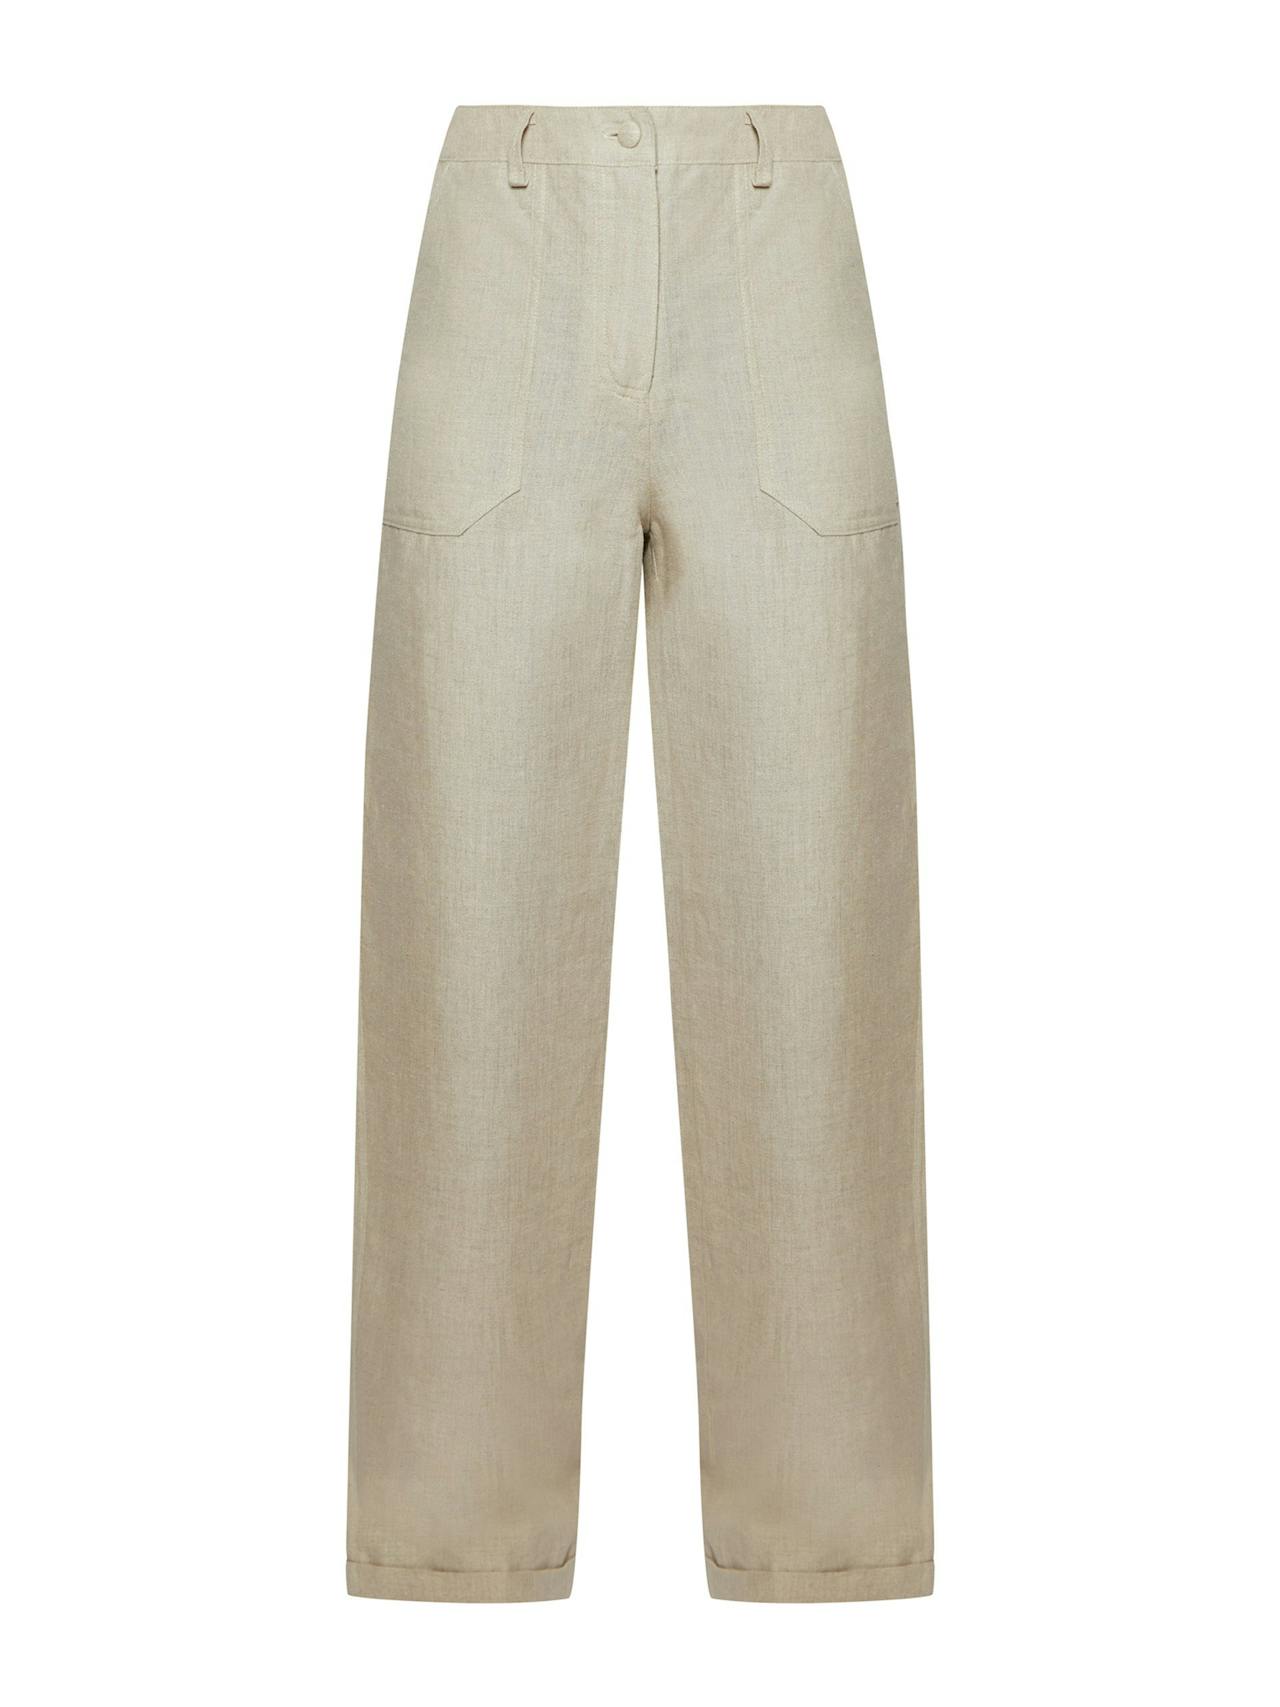 Flax linen Abril trousers